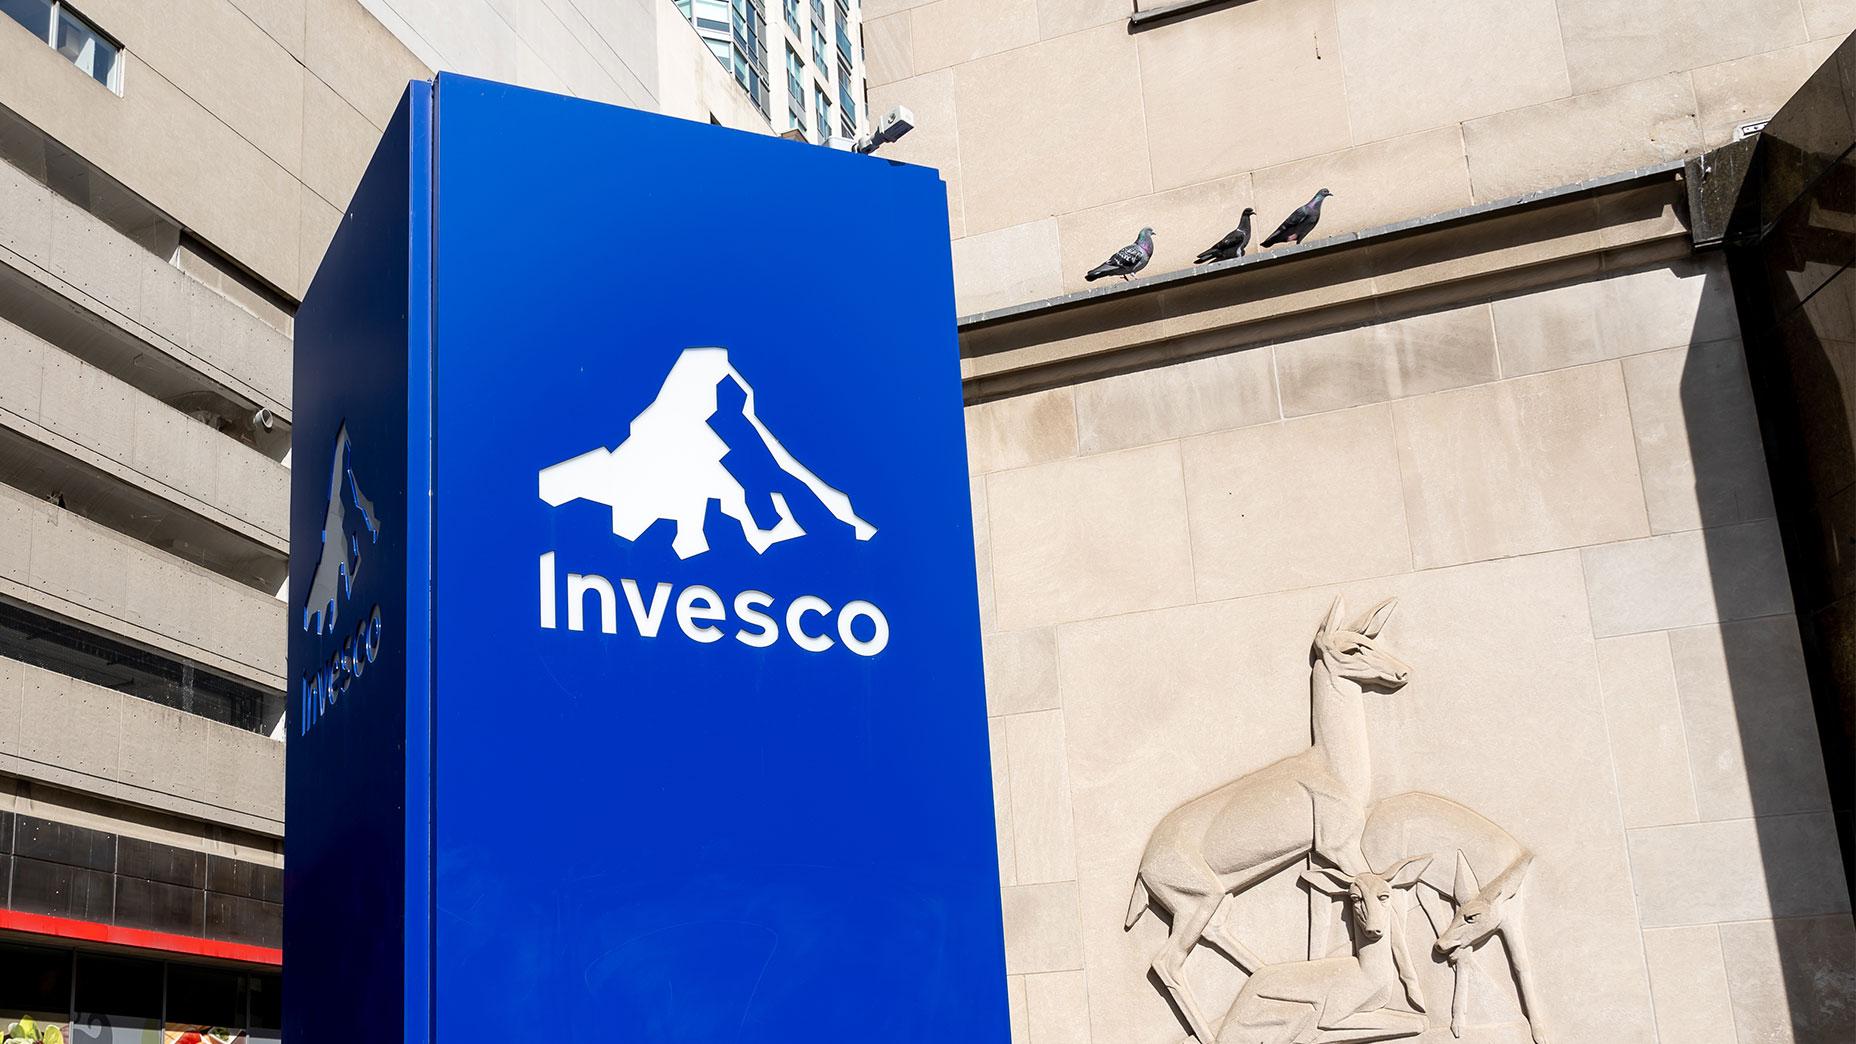 Invesco QQQ Trust Stock Analysis: Is There Potential for Further Growth?